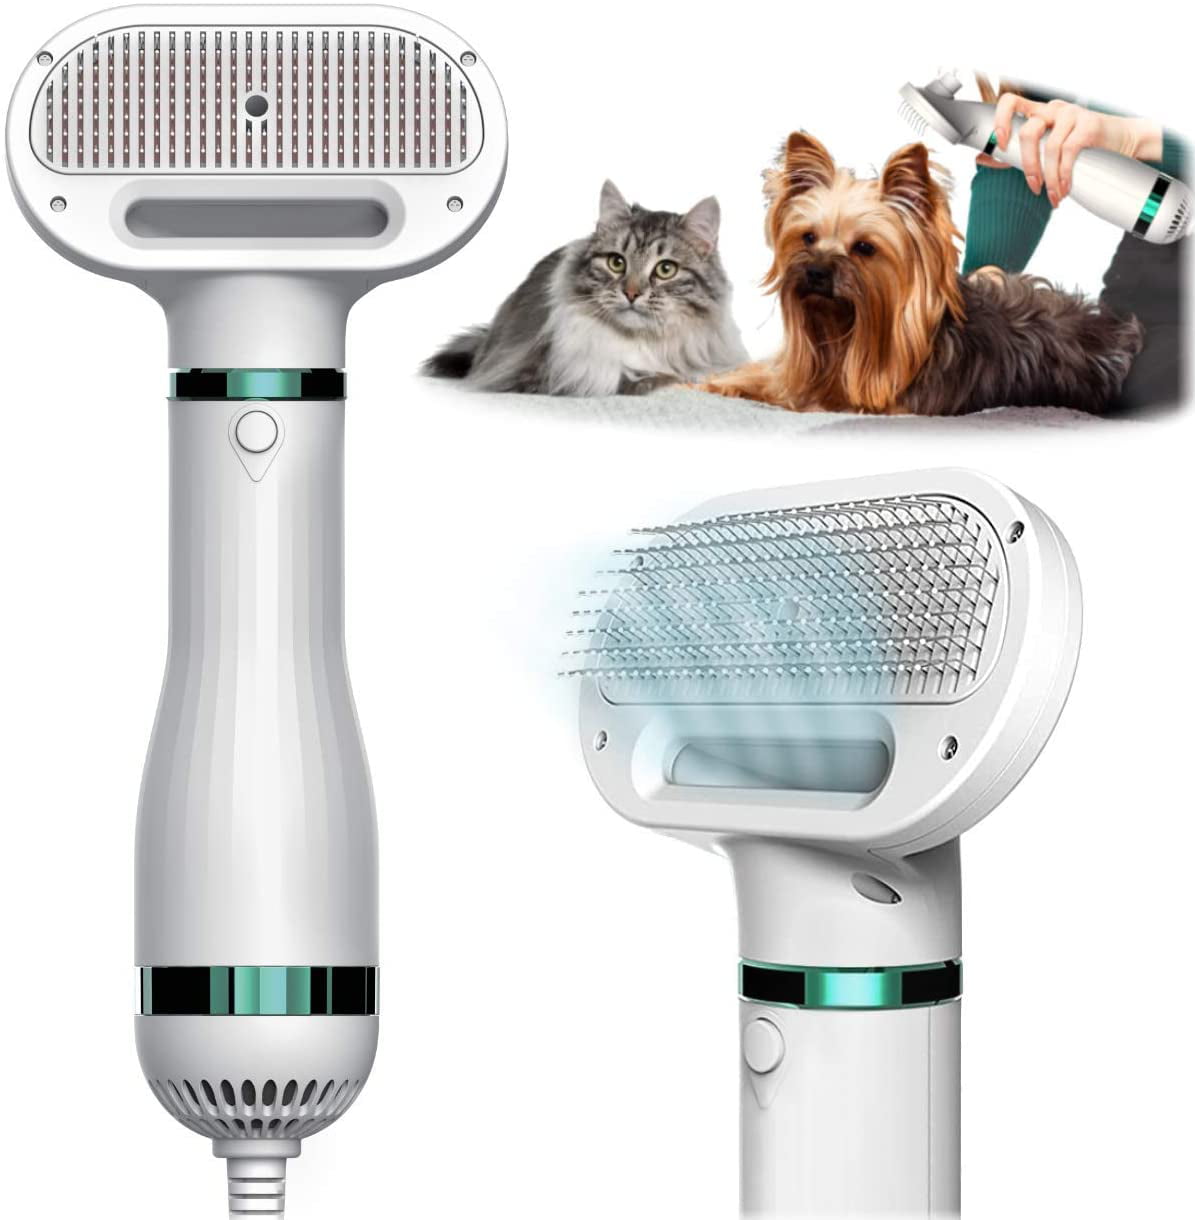 2-in-1 Professional Pet Grooming Hair Dryer Blower for Small and Medium Dogs and Cats Pet Hair Dryer Dog Slicker Brush with 3 Heat Settings 